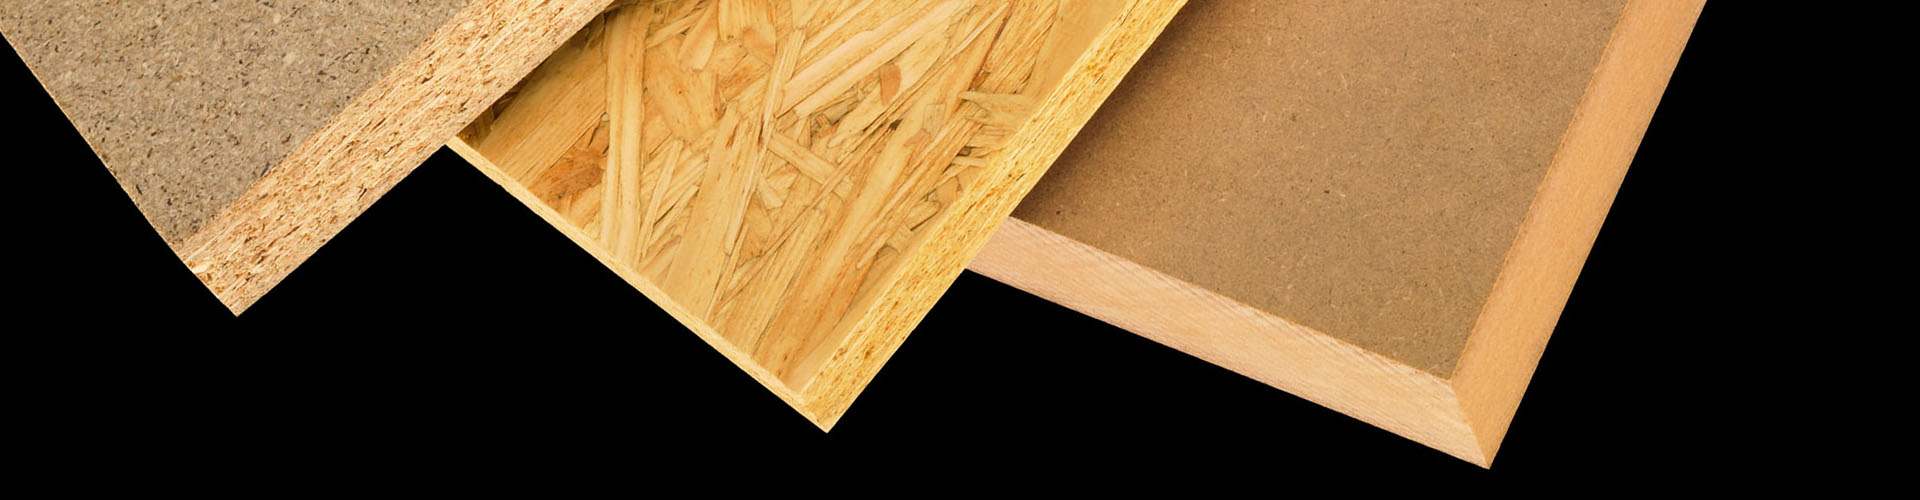 panel saw materials